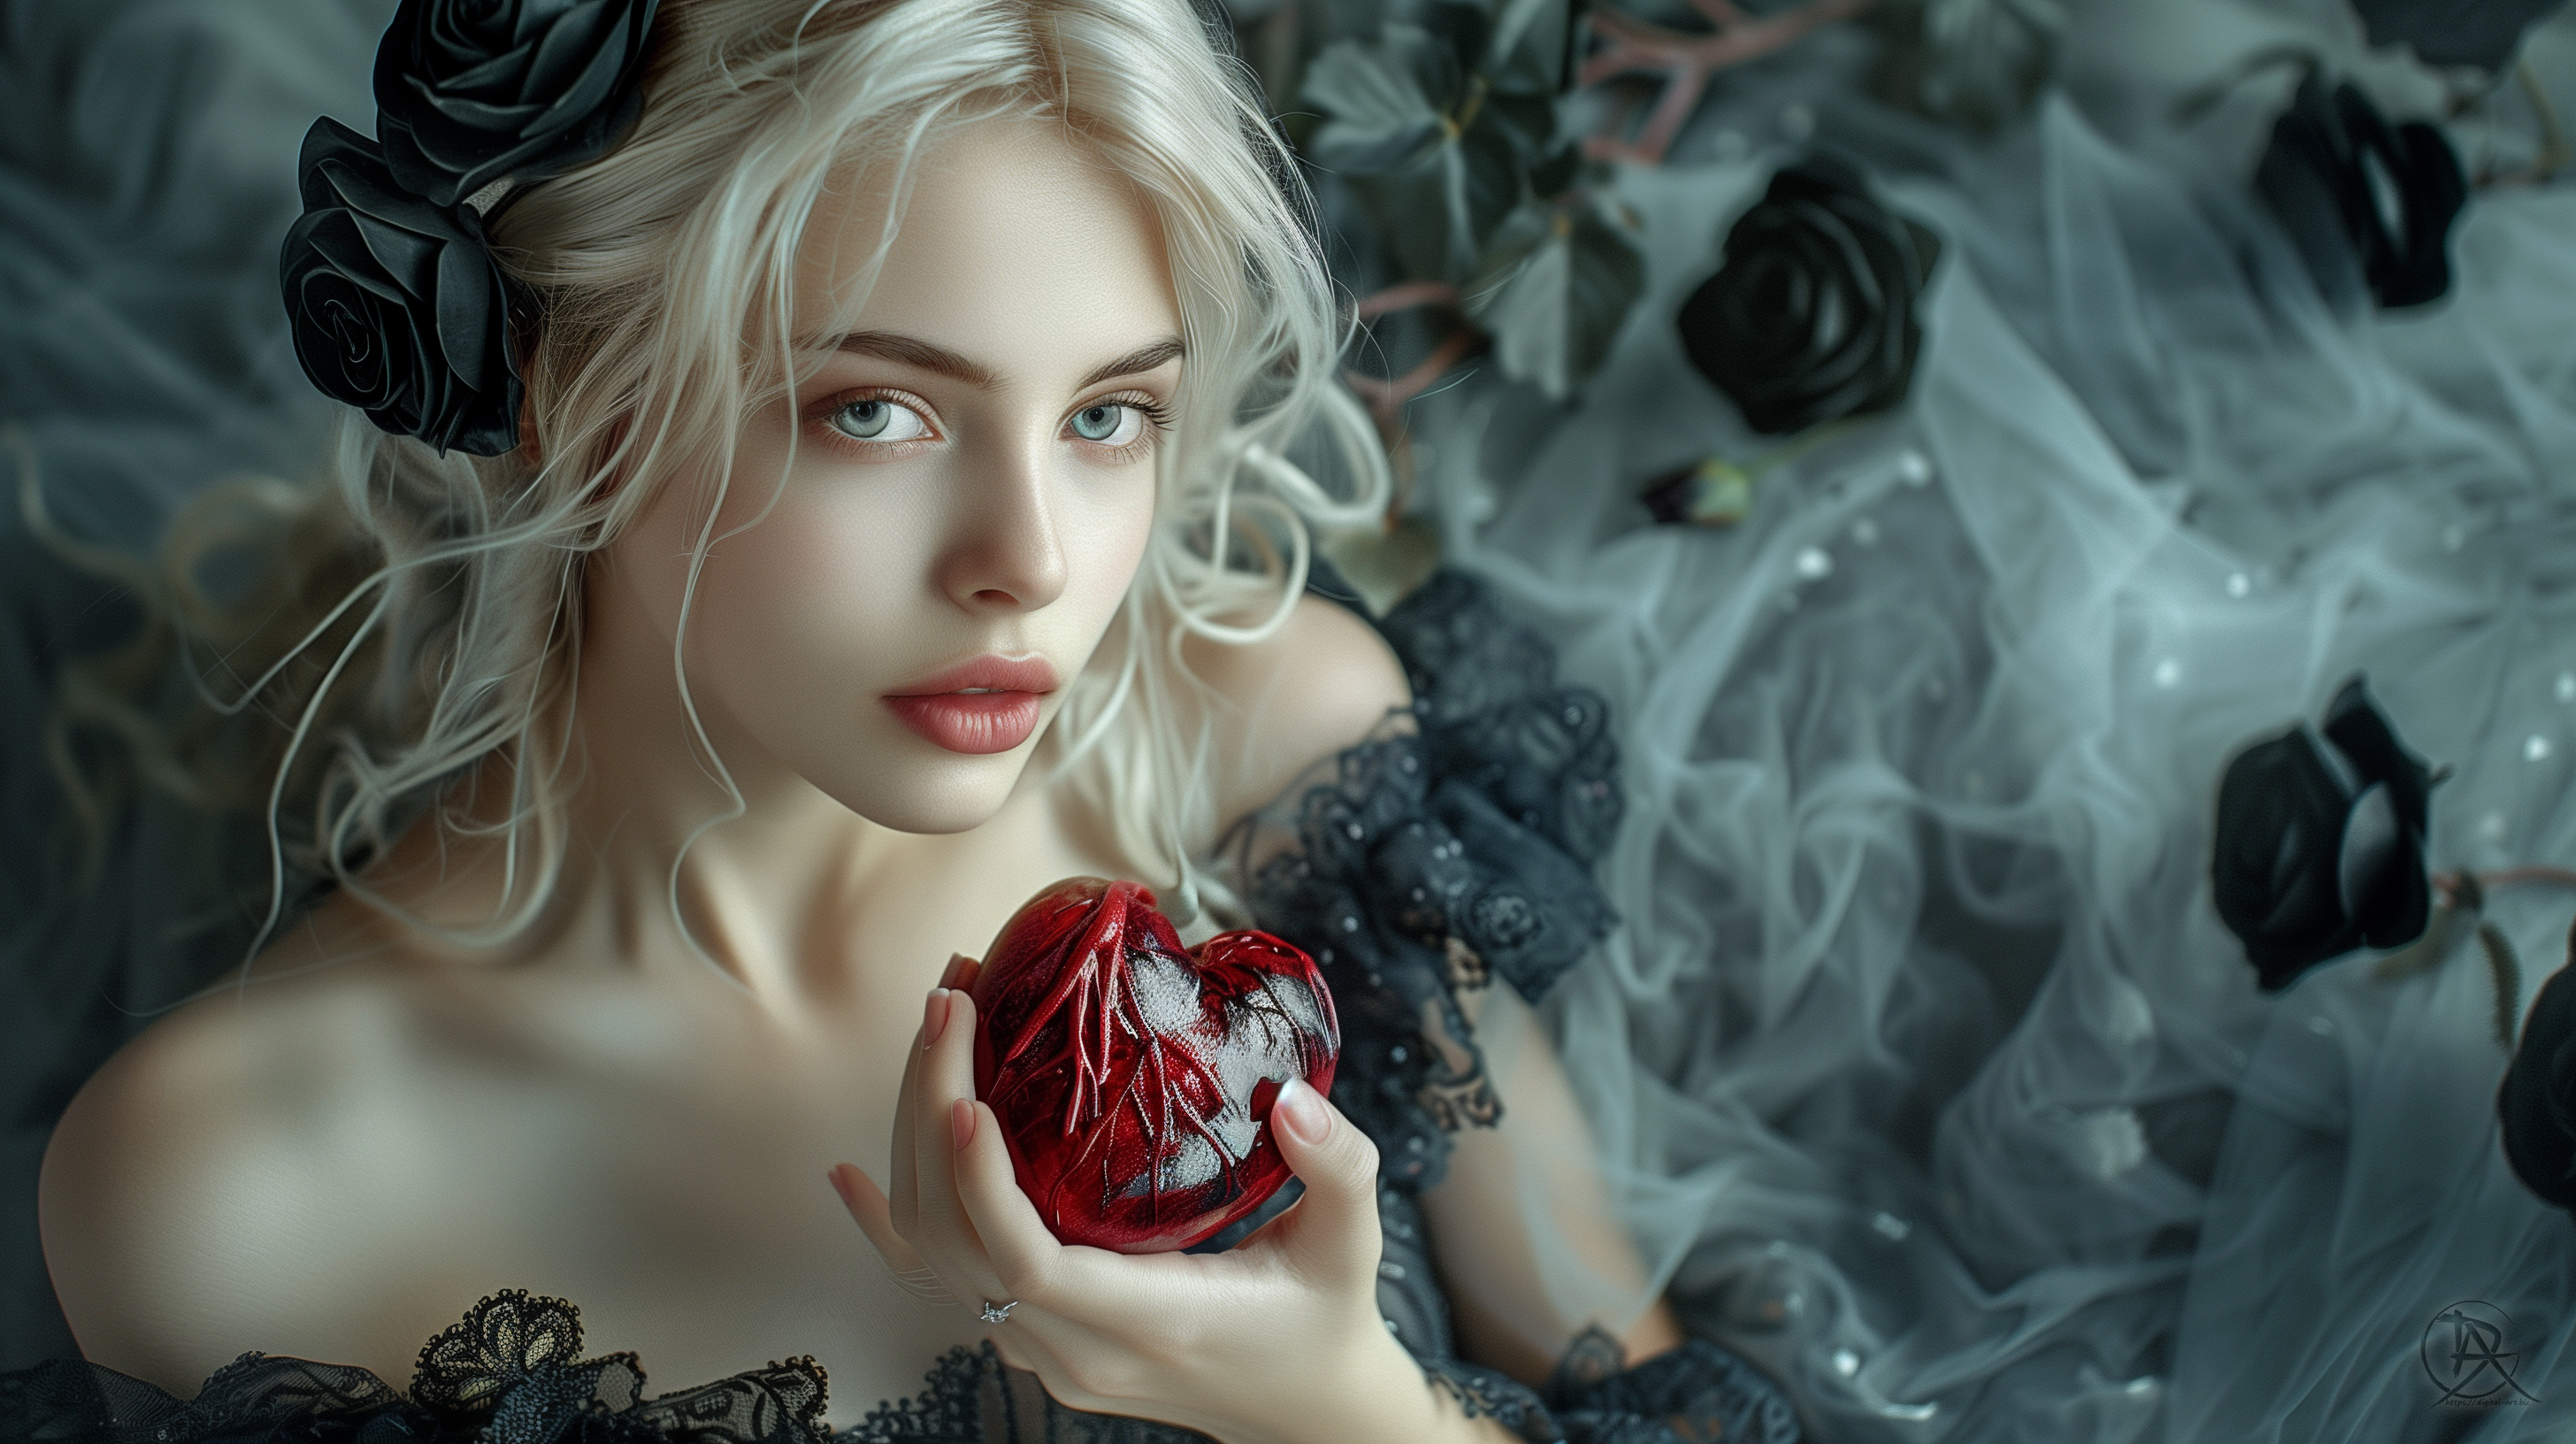 Enigma of the Enchanted Heart